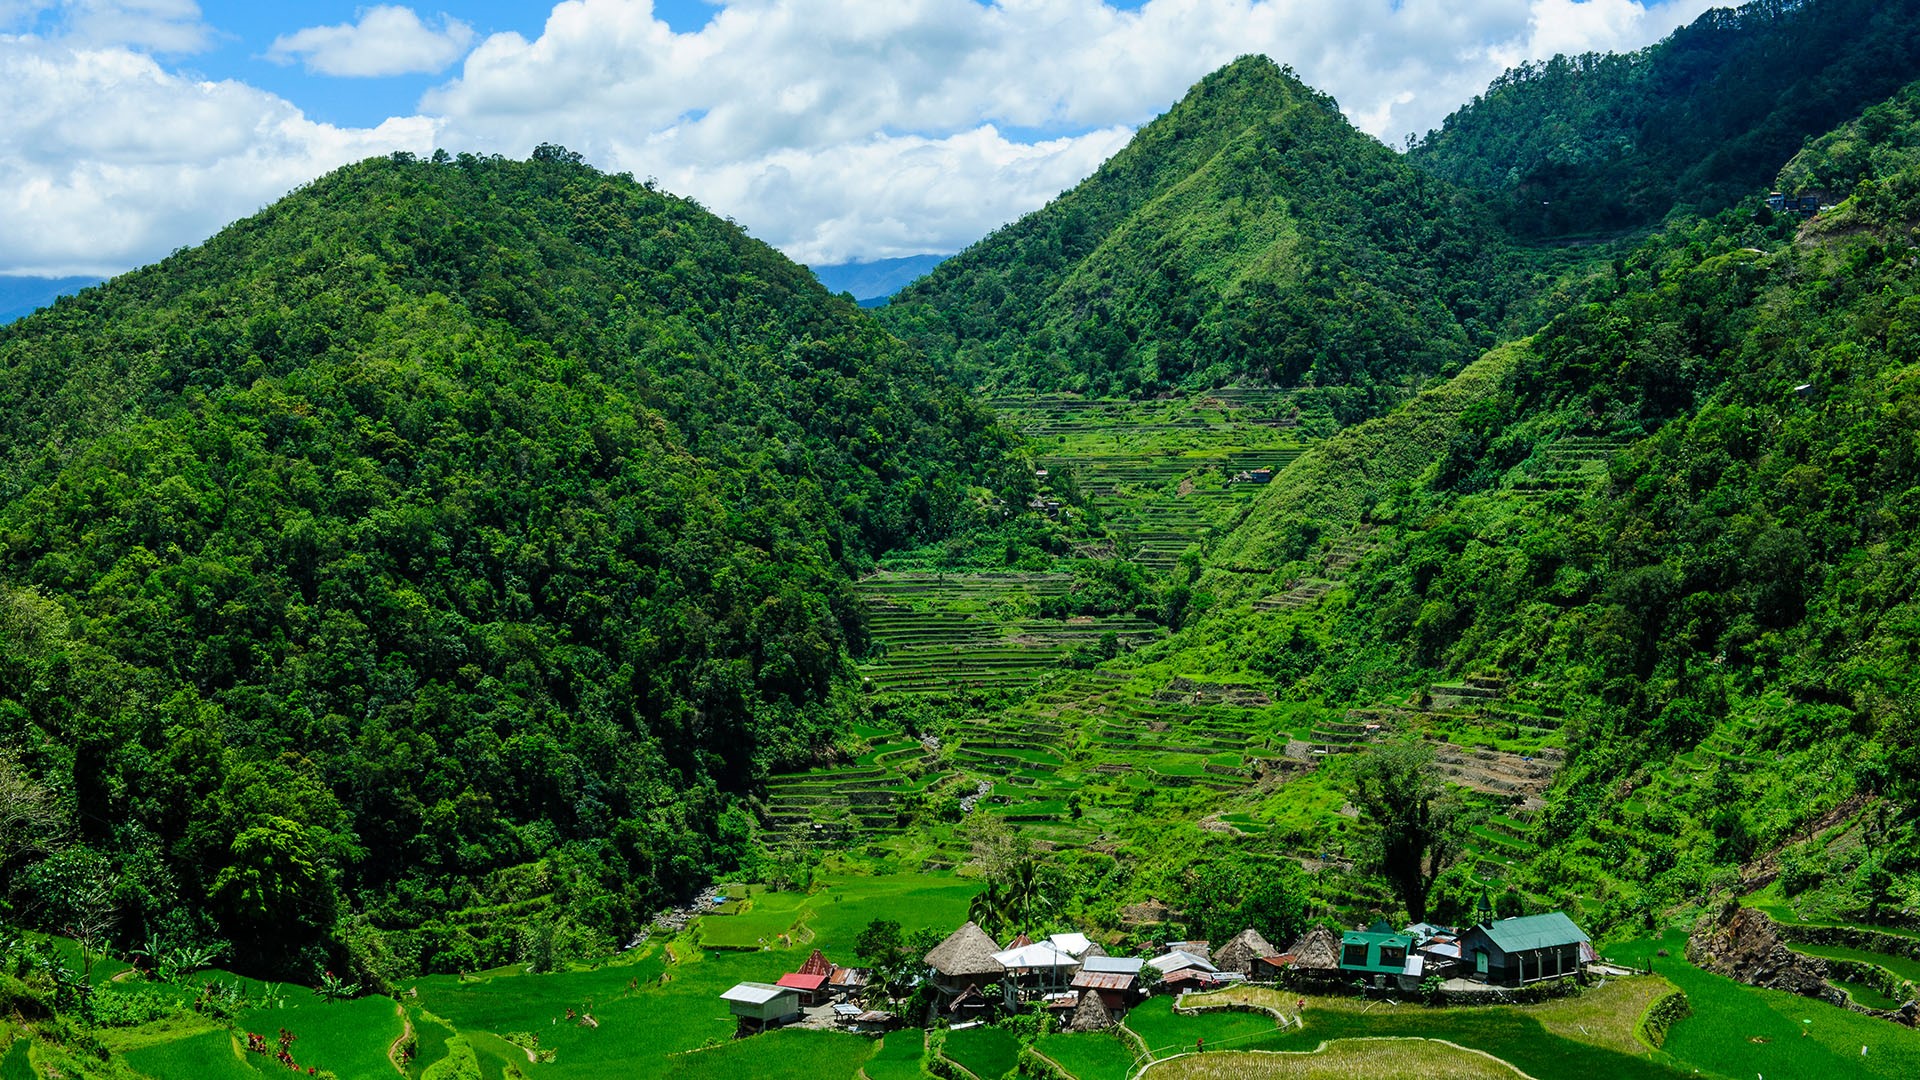 Nature Landscape Mountains Clouds Sky Trees Farm Field House Rice Terrace Rice Fields Philippines 1920x1080